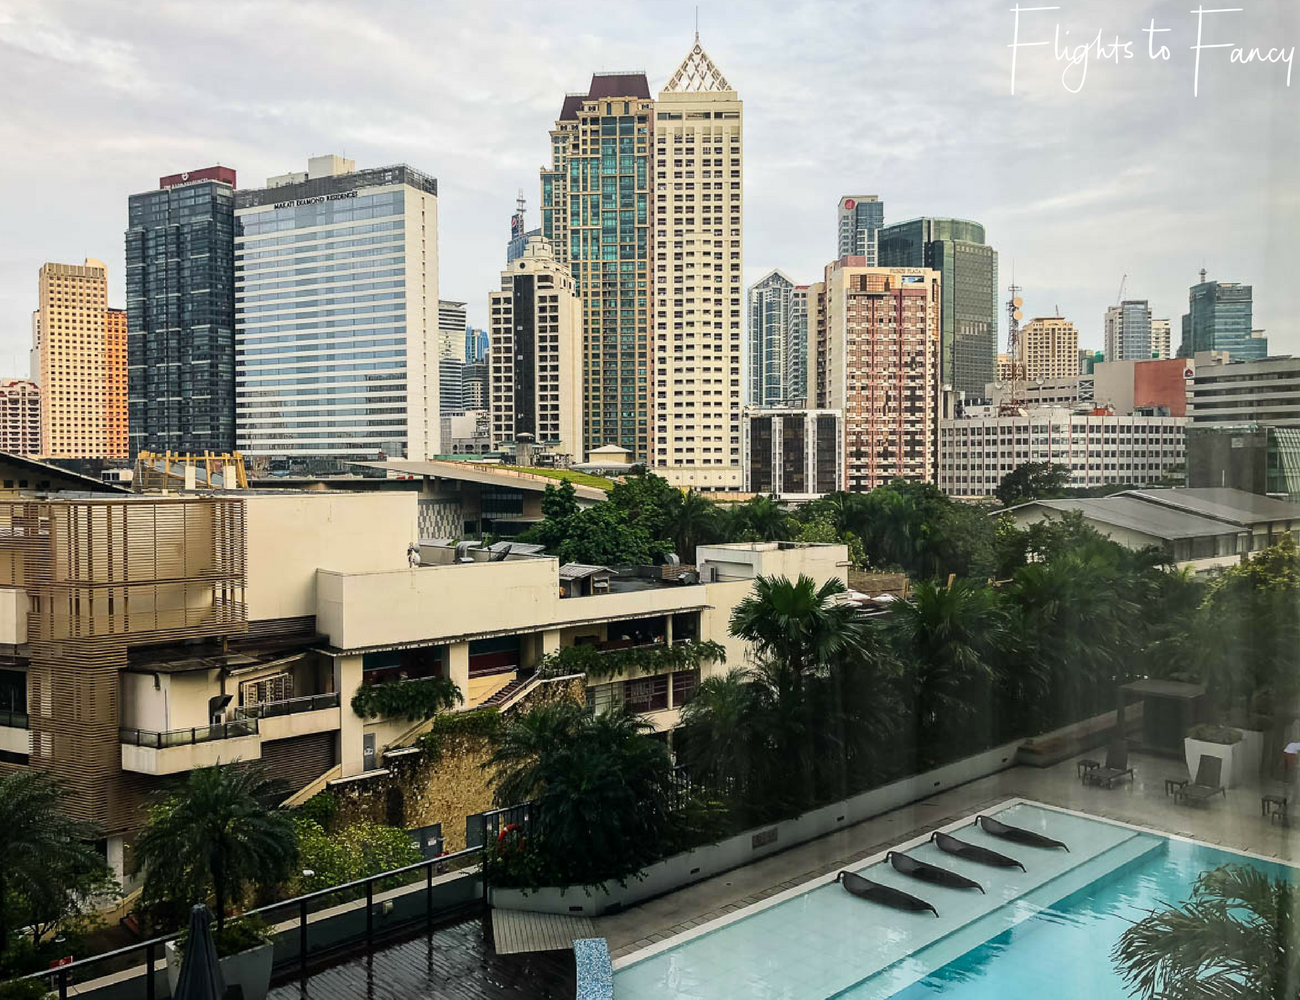 Flights to Fancy - View of Makati Shopping Malls from the Fairmont Makati